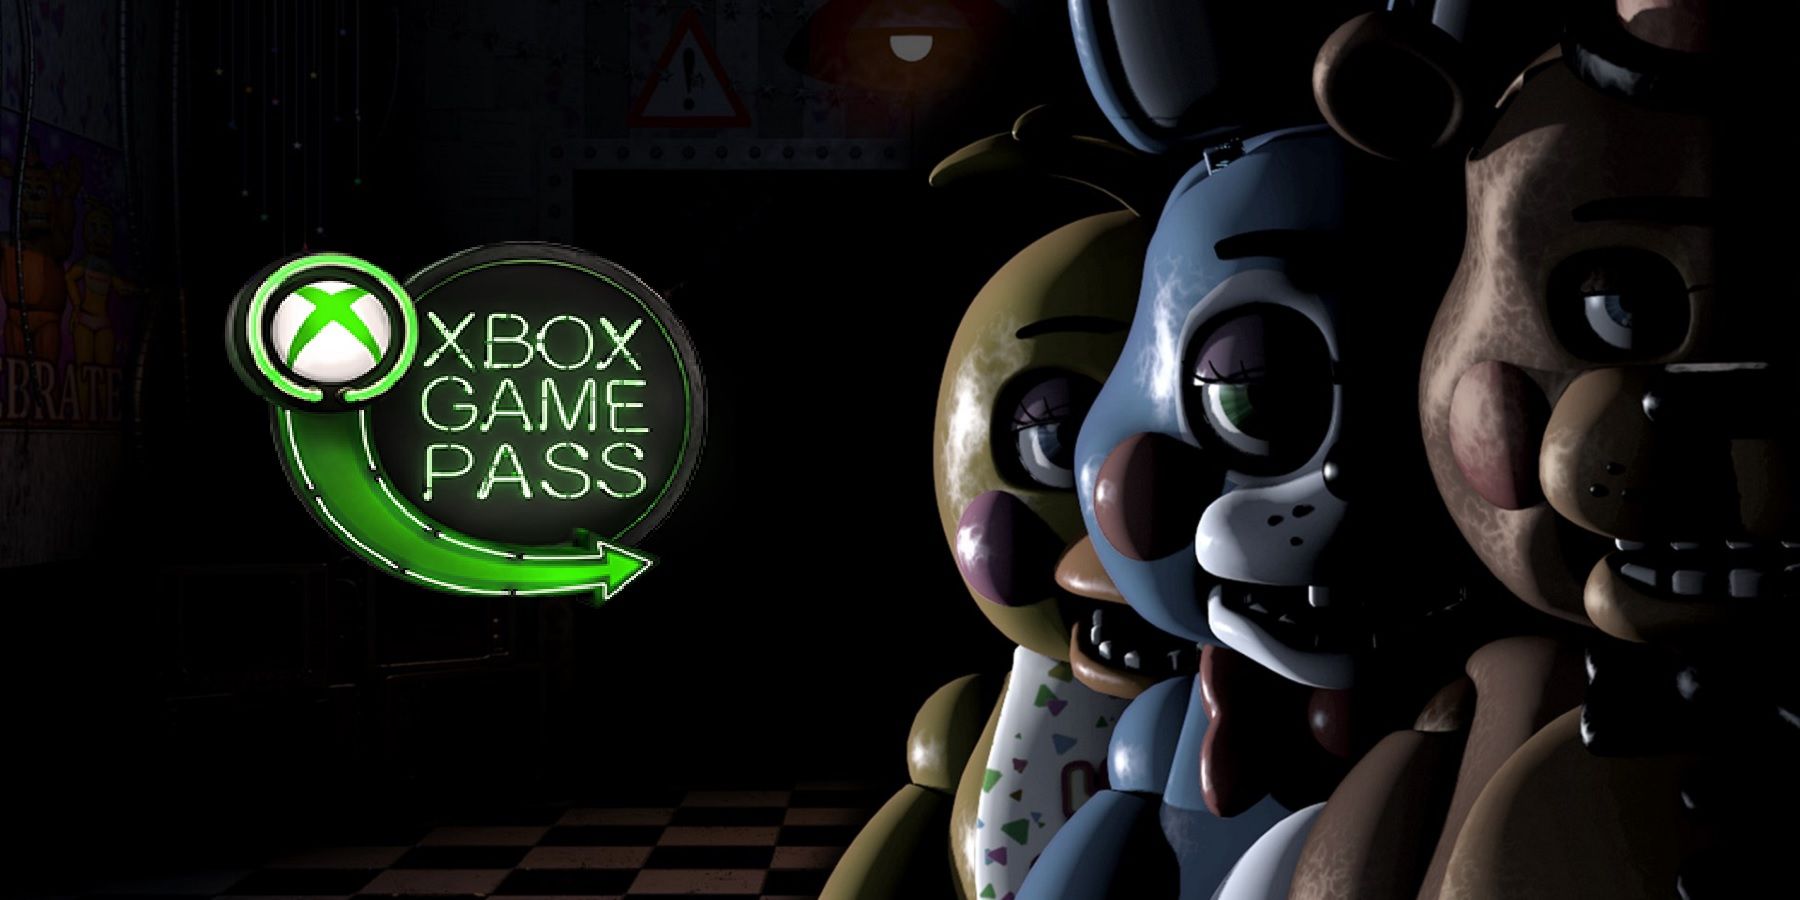 five nights at freddys xbox game pass logo